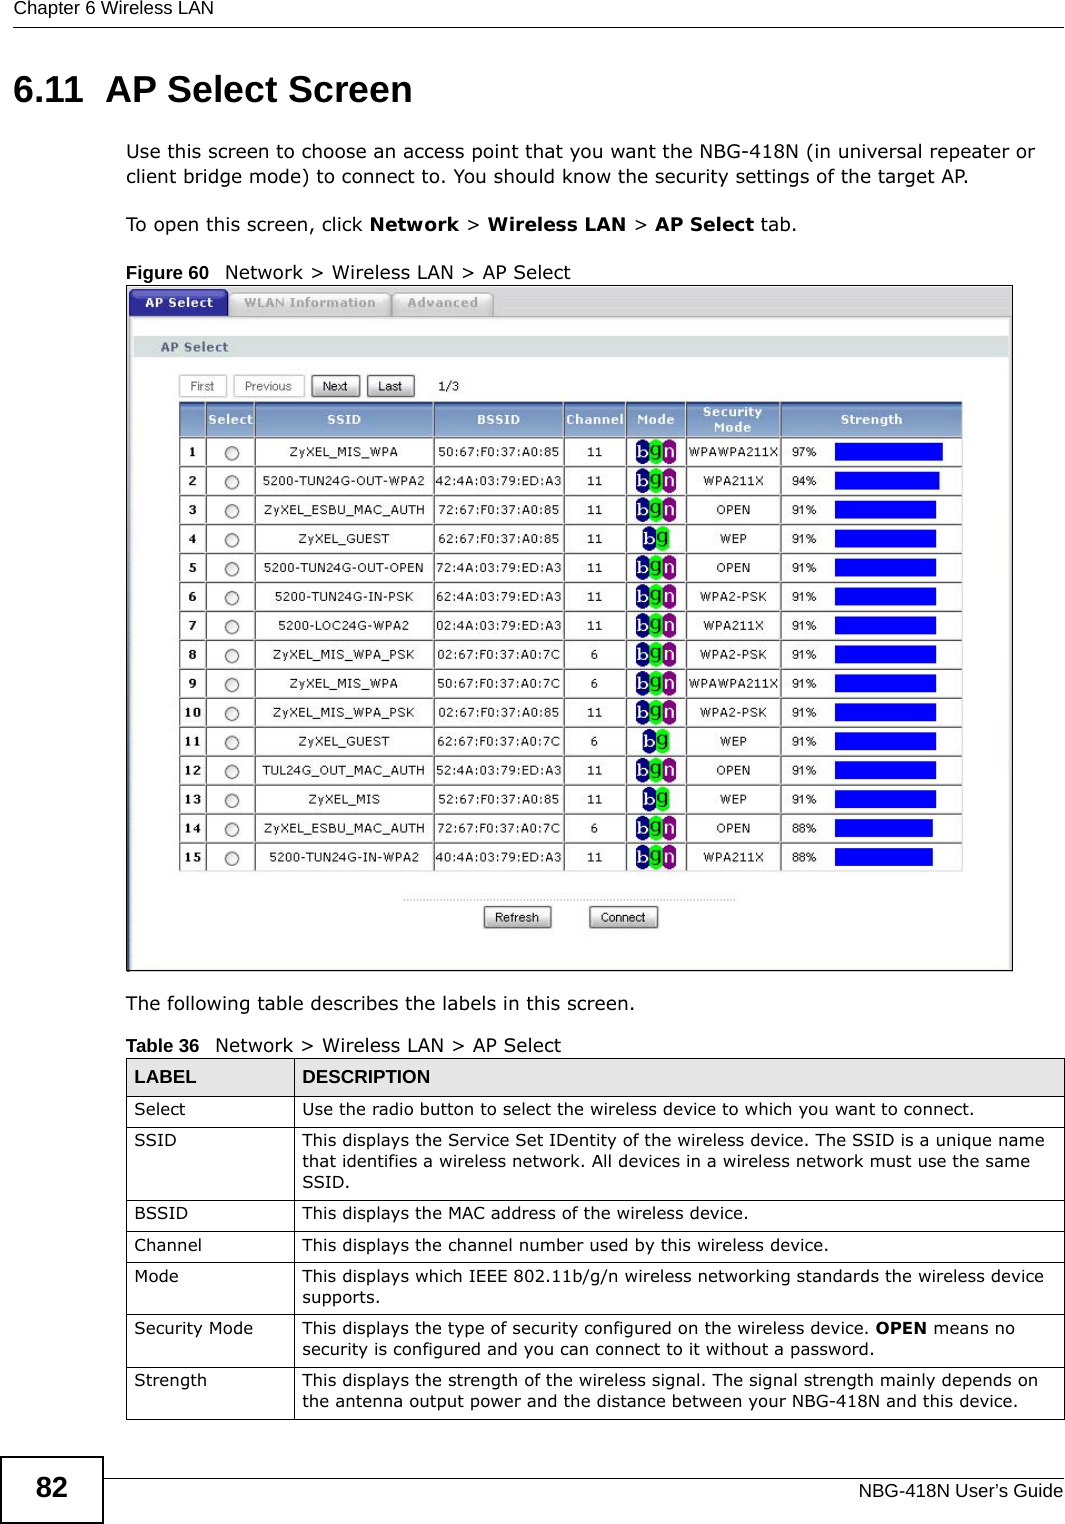 Chapter 6 Wireless LANNBG-418N User’s Guide826.11  AP Select ScreenUse this screen to choose an access point that you want the NBG-418N (in universal repeater or client bridge mode) to connect to. You should know the security settings of the target AP.To open this screen, click Network &gt; Wireless LAN &gt; AP Select tab.Figure 60   Network &gt; Wireless LAN &gt; AP SelectThe following table describes the labels in this screen.Table 36   Network &gt; Wireless LAN &gt; AP SelectLABEL DESCRIPTIONSelect Use the radio button to select the wireless device to which you want to connect.  SSID This displays the Service Set IDentity of the wireless device. The SSID is a unique name that identifies a wireless network. All devices in a wireless network must use the same SSID.BSSID This displays the MAC address of the wireless device.Channel  This displays the channel number used by this wireless device.Mode This displays which IEEE 802.11b/g/n wireless networking standards the wireless device supports.Security Mode This displays the type of security configured on the wireless device. OPEN means no security is configured and you can connect to it without a password.Strength This displays the strength of the wireless signal. The signal strength mainly depends on the antenna output power and the distance between your NBG-418N and this device.